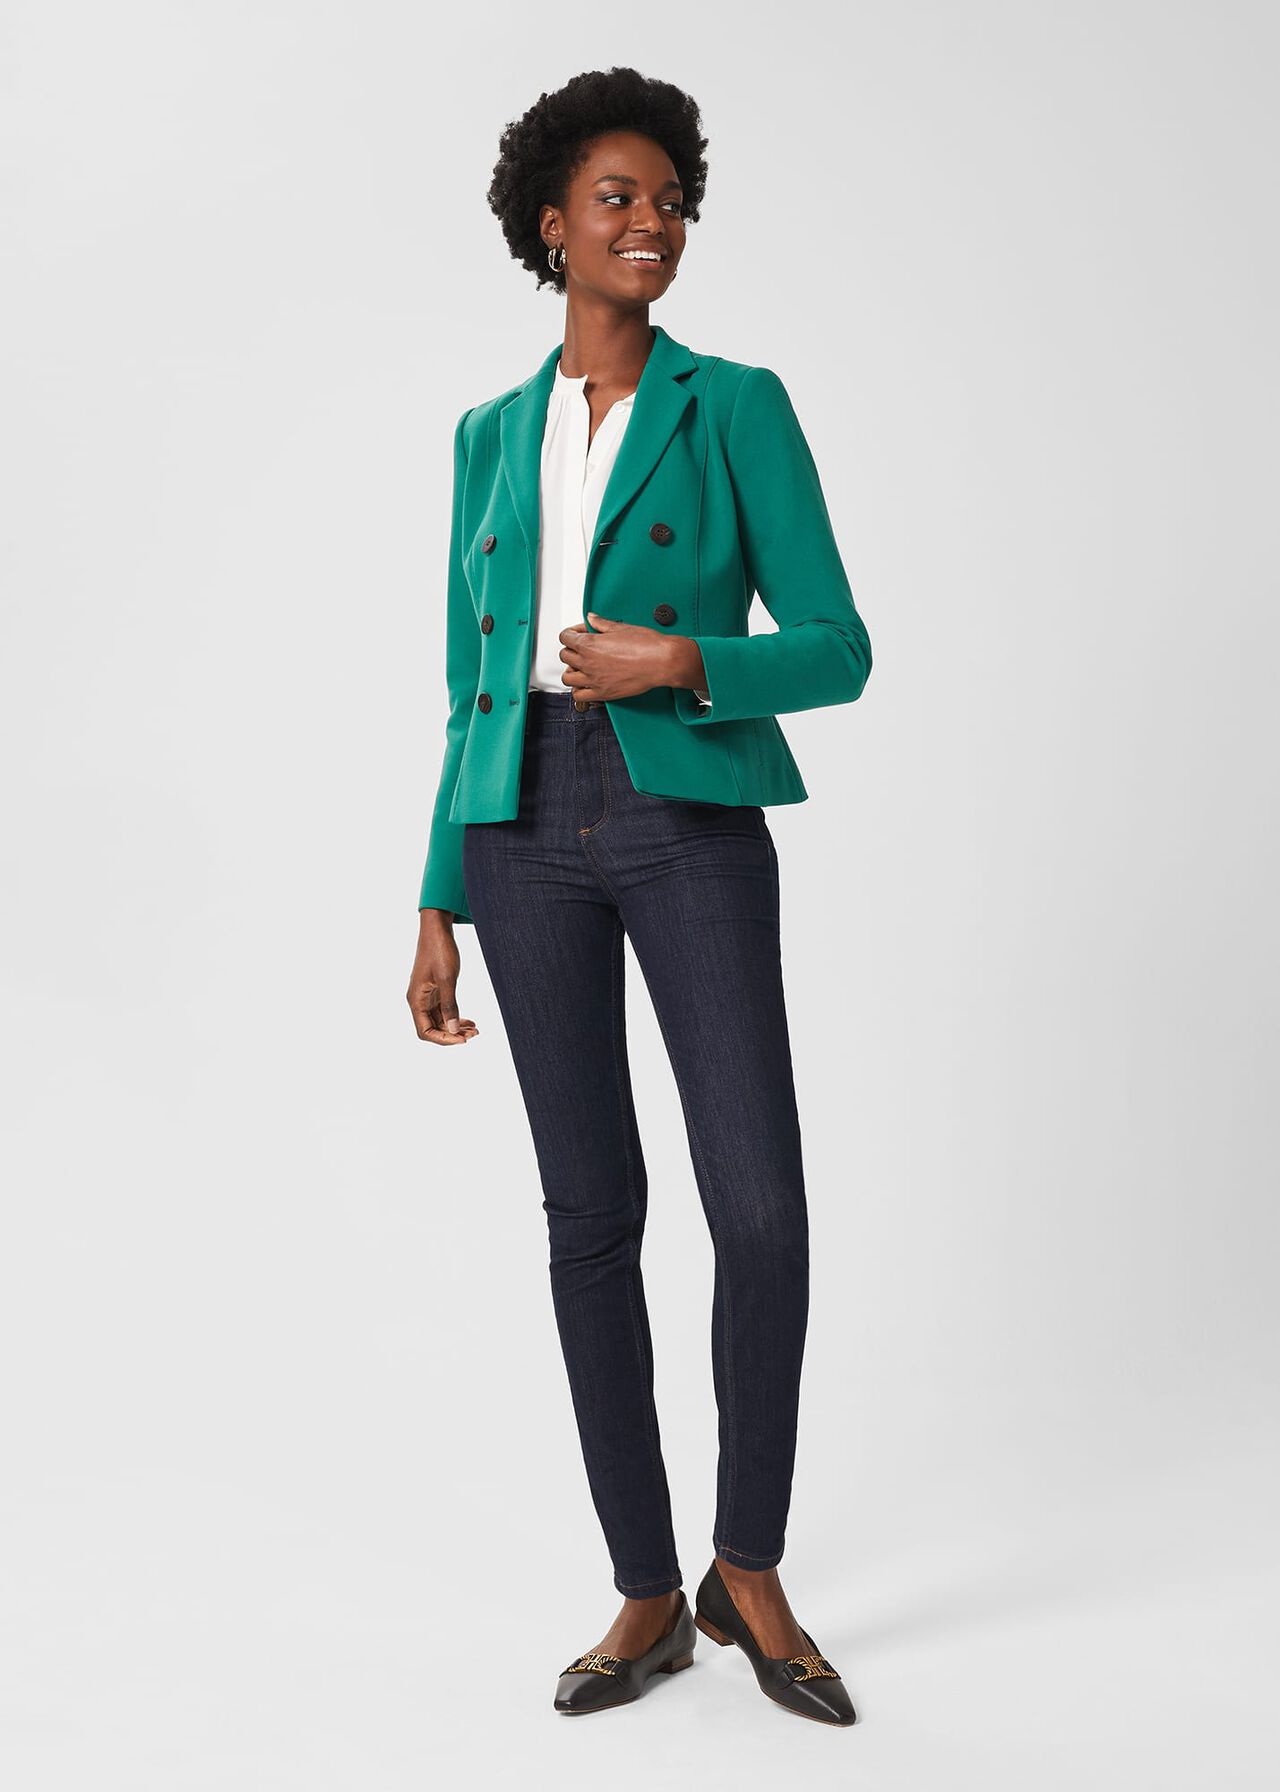 Beatrice Double Breasted Jacket, Jade Green, hi-res